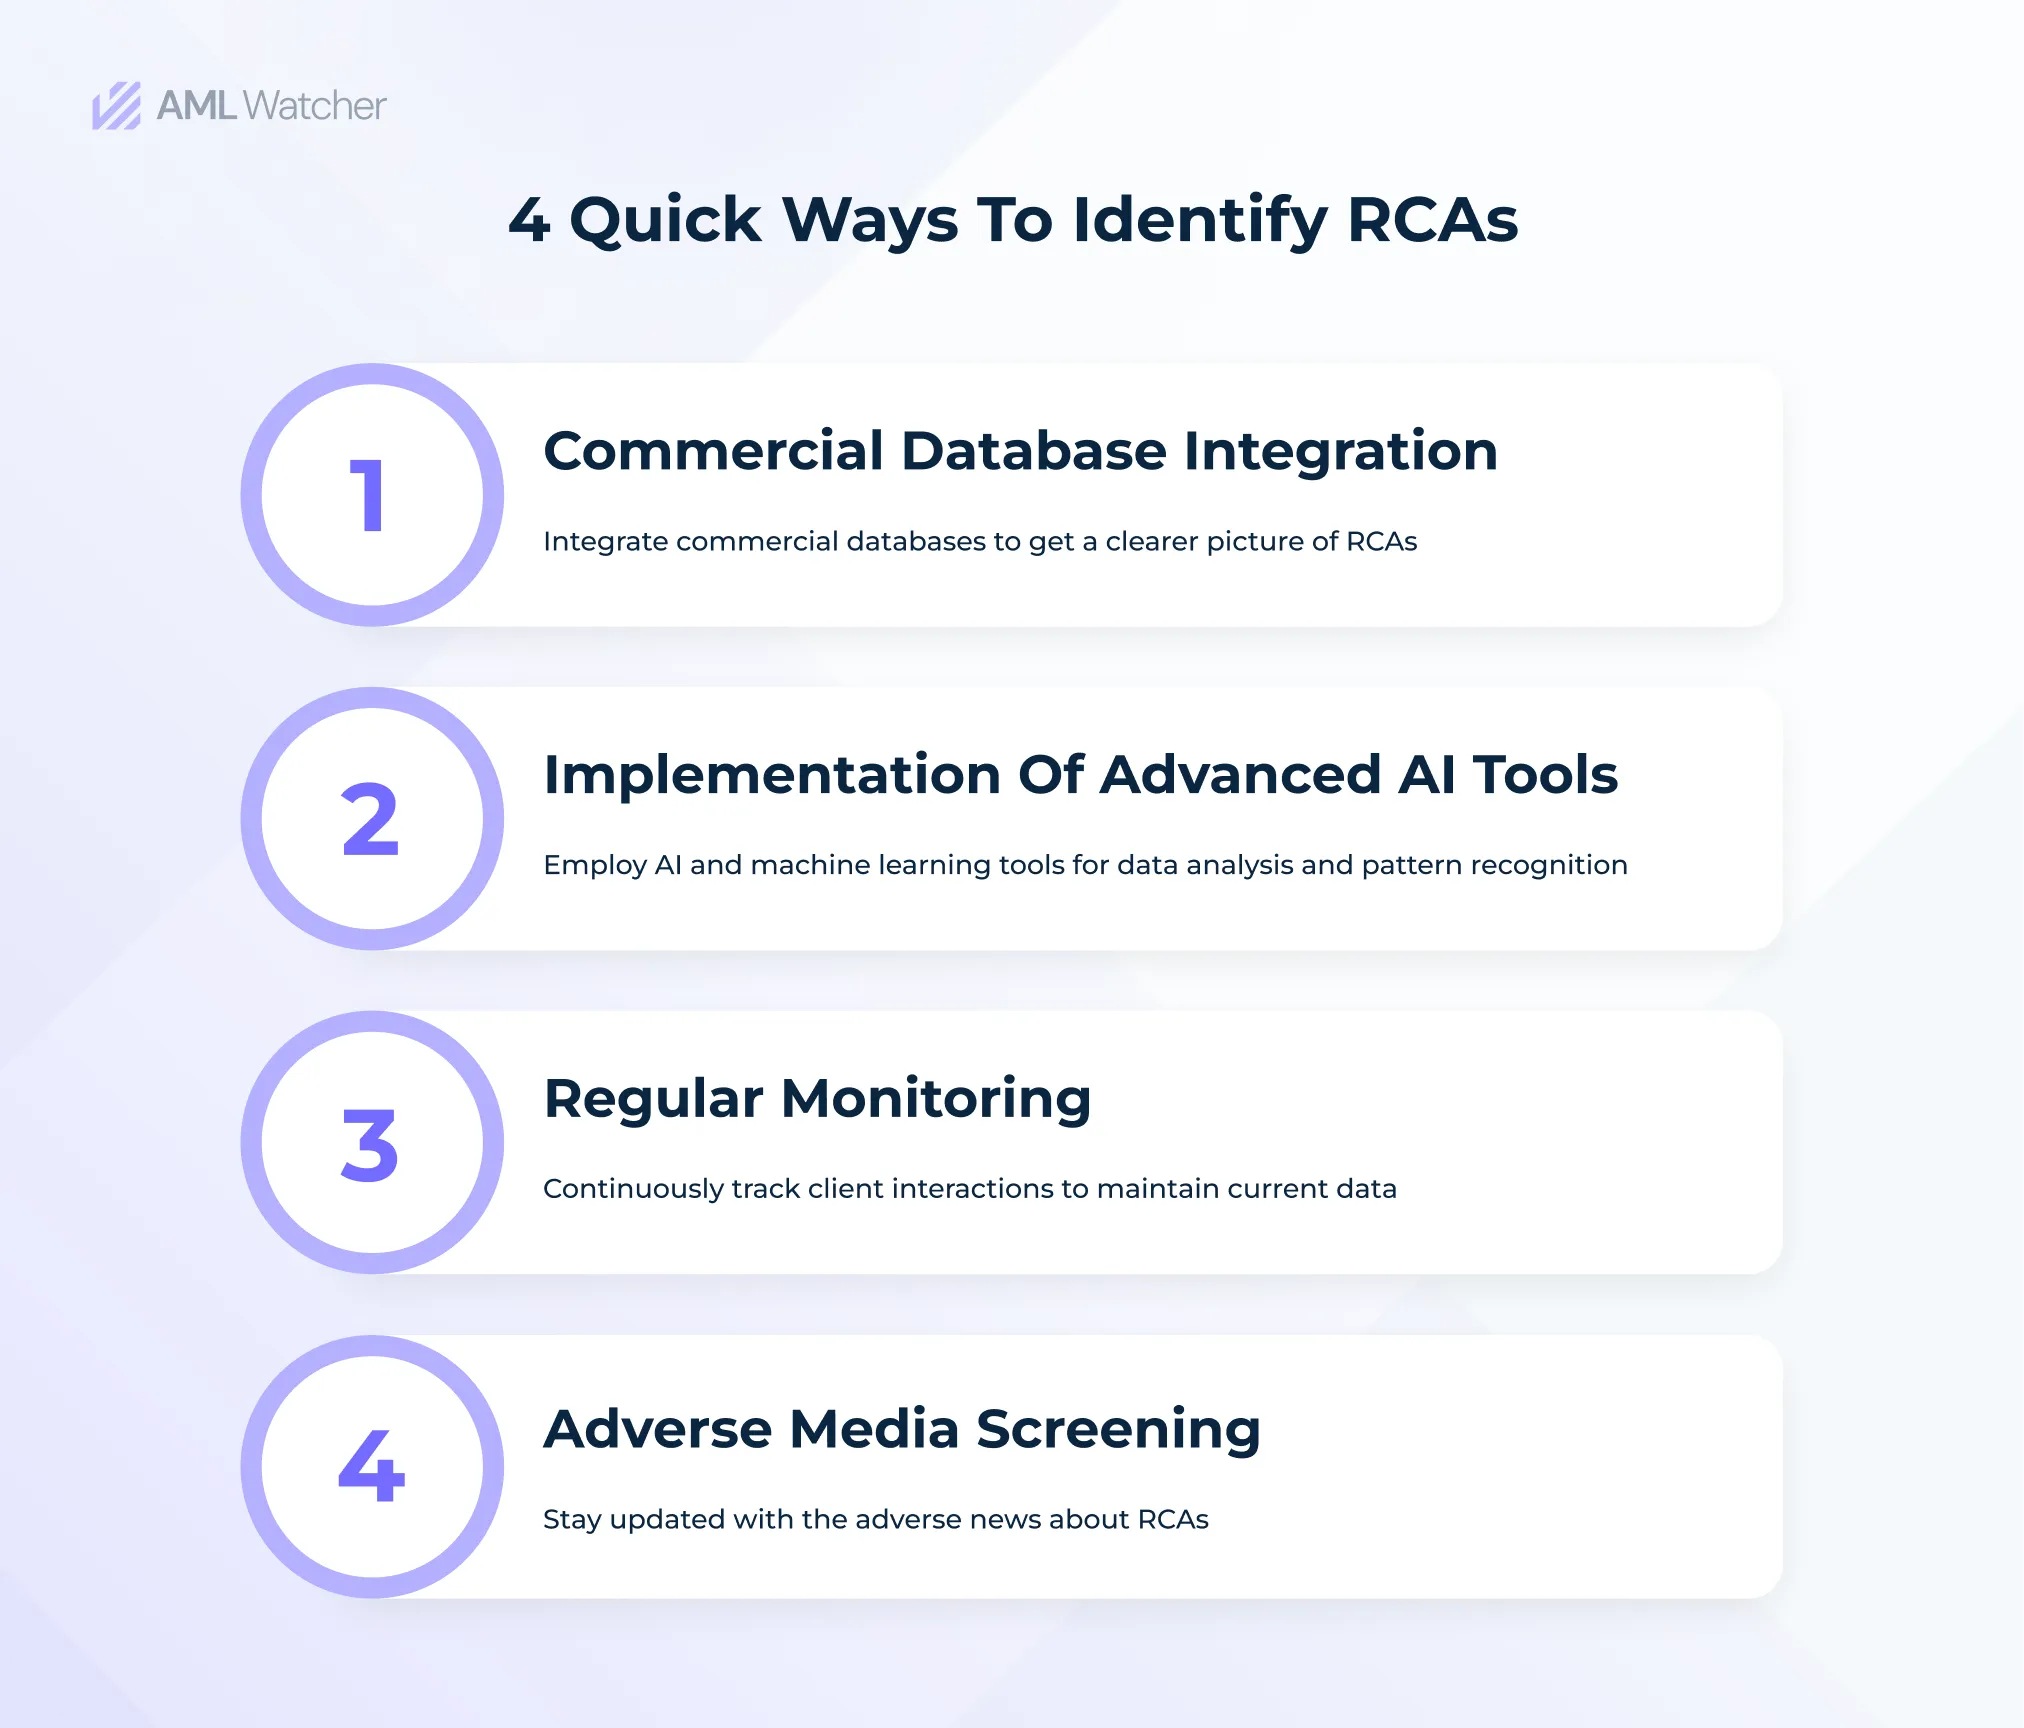 This image illustrates the four principal stages of RCA’s screening process